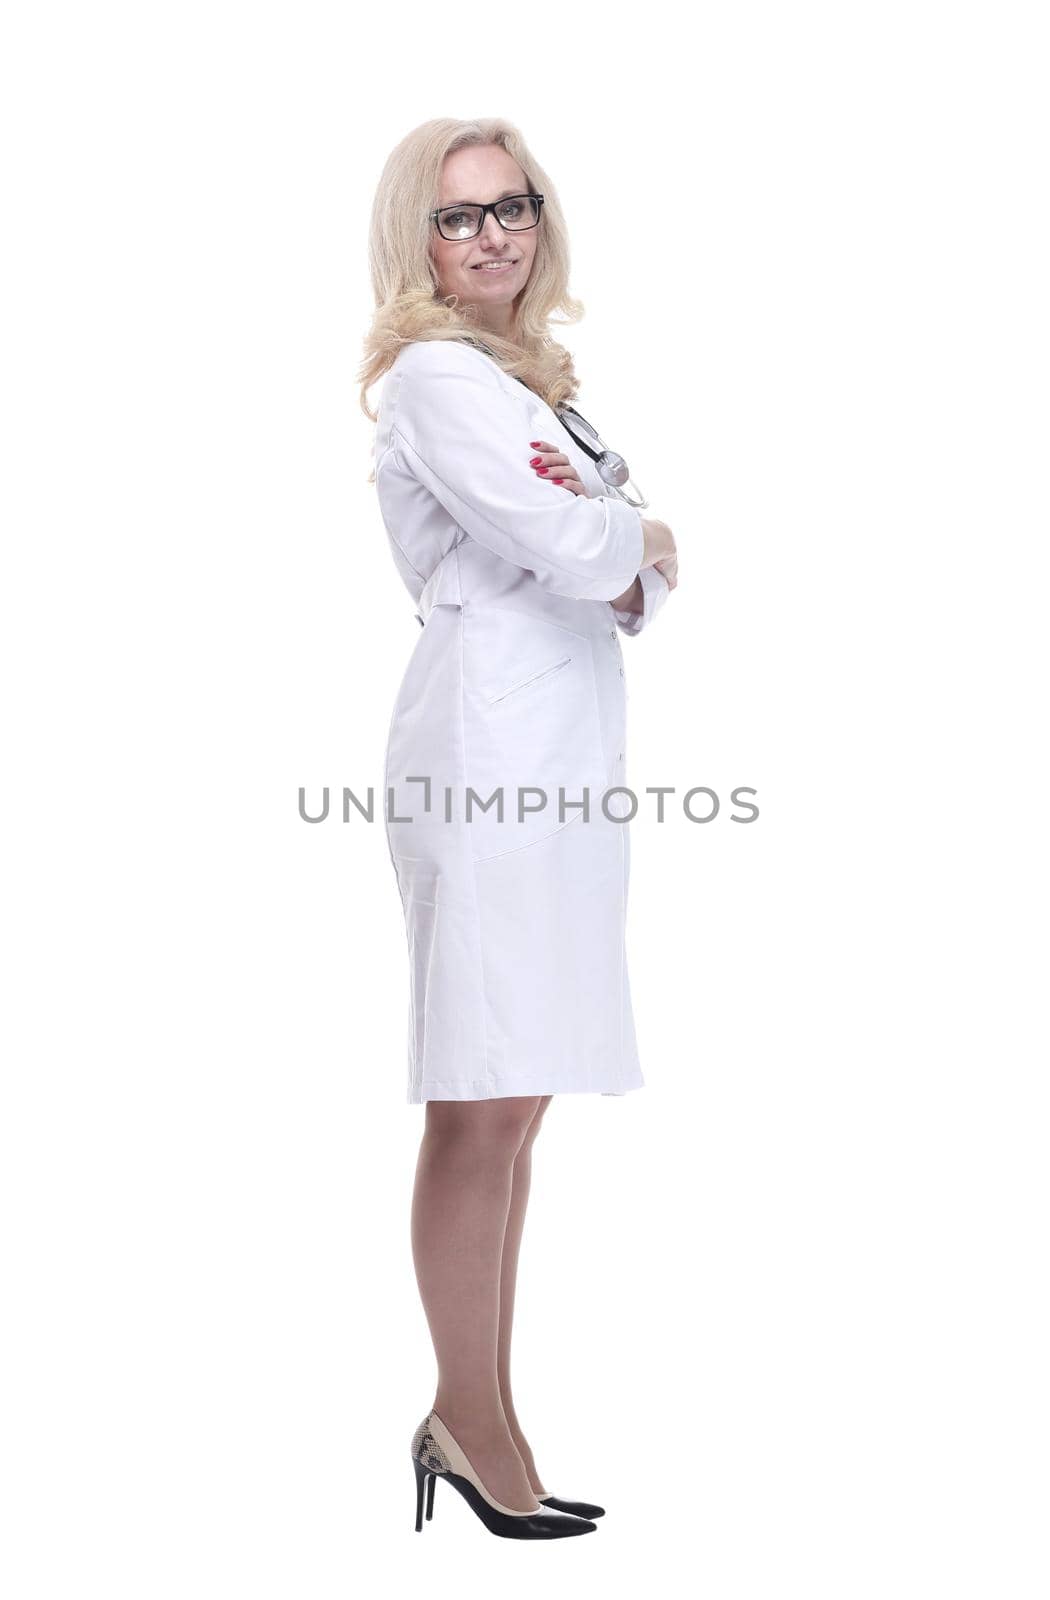 in full growth. attractive woman doctor looking at you . isolated on a white background.